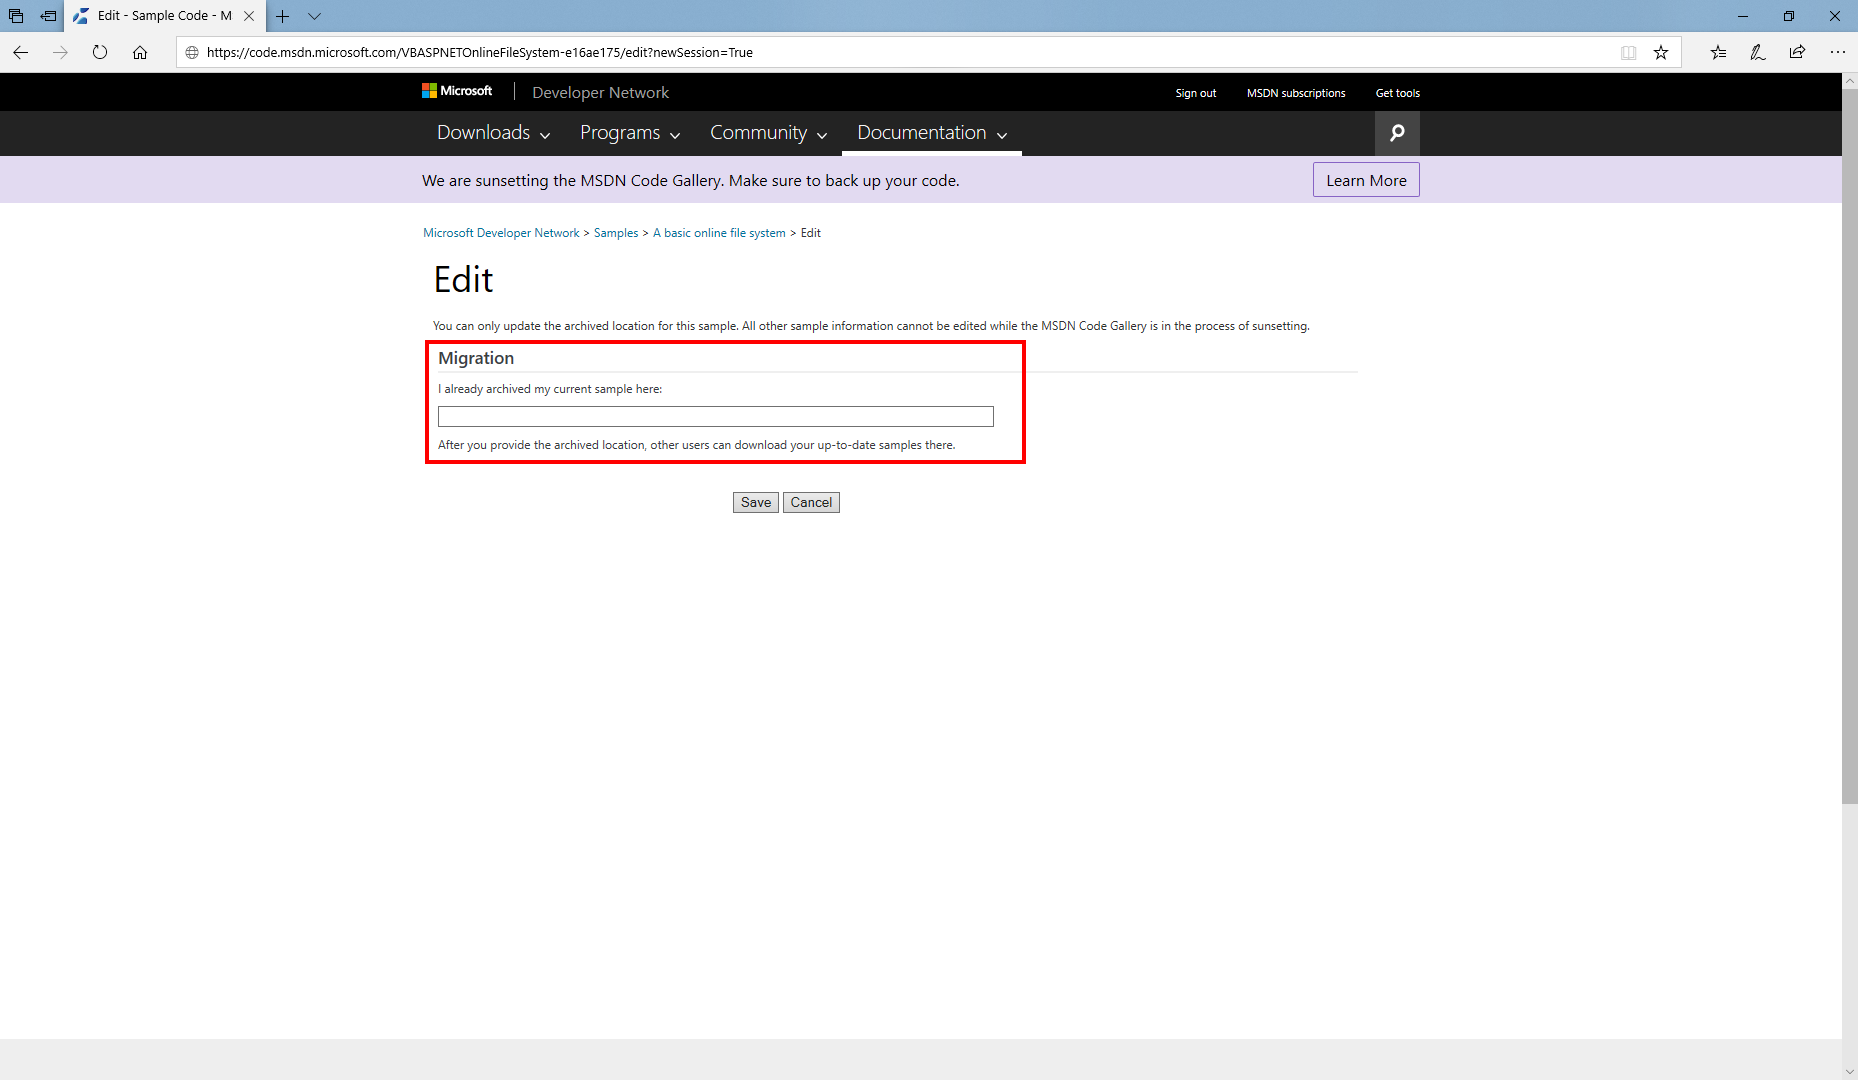 MSDN Code Gallery edit sample page migration section